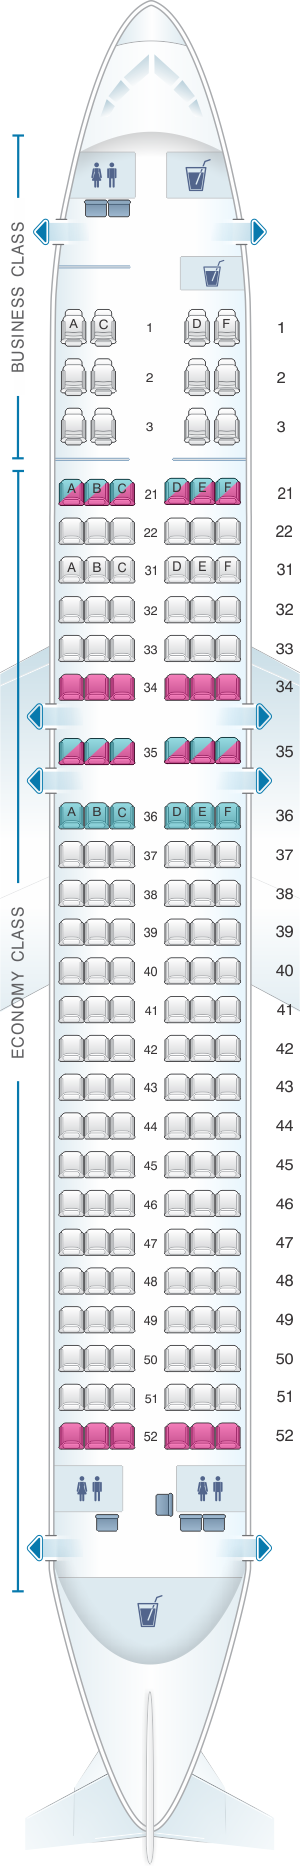 Seat Map Philippine Airlines Airbus A320 200 V1 | SeatMaestro